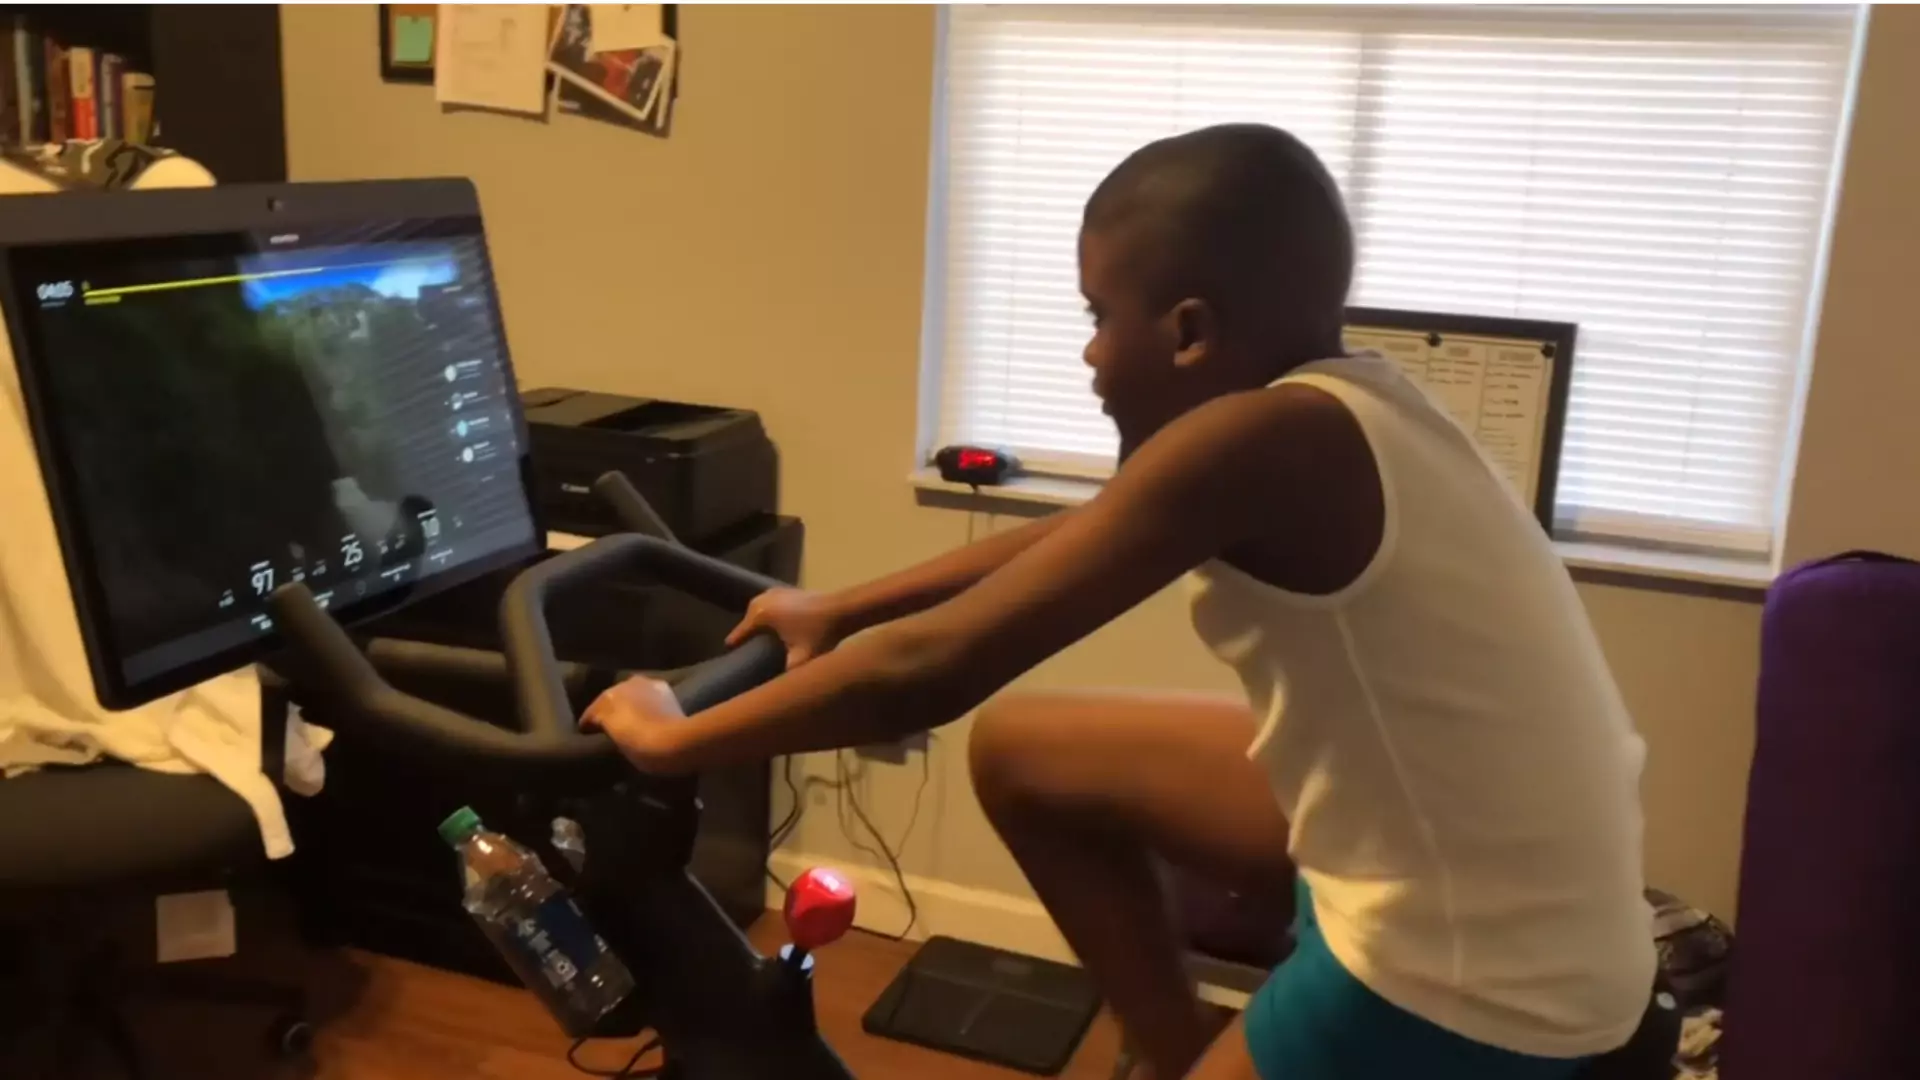 How Safe Is Peloton For Kids' Age Groups